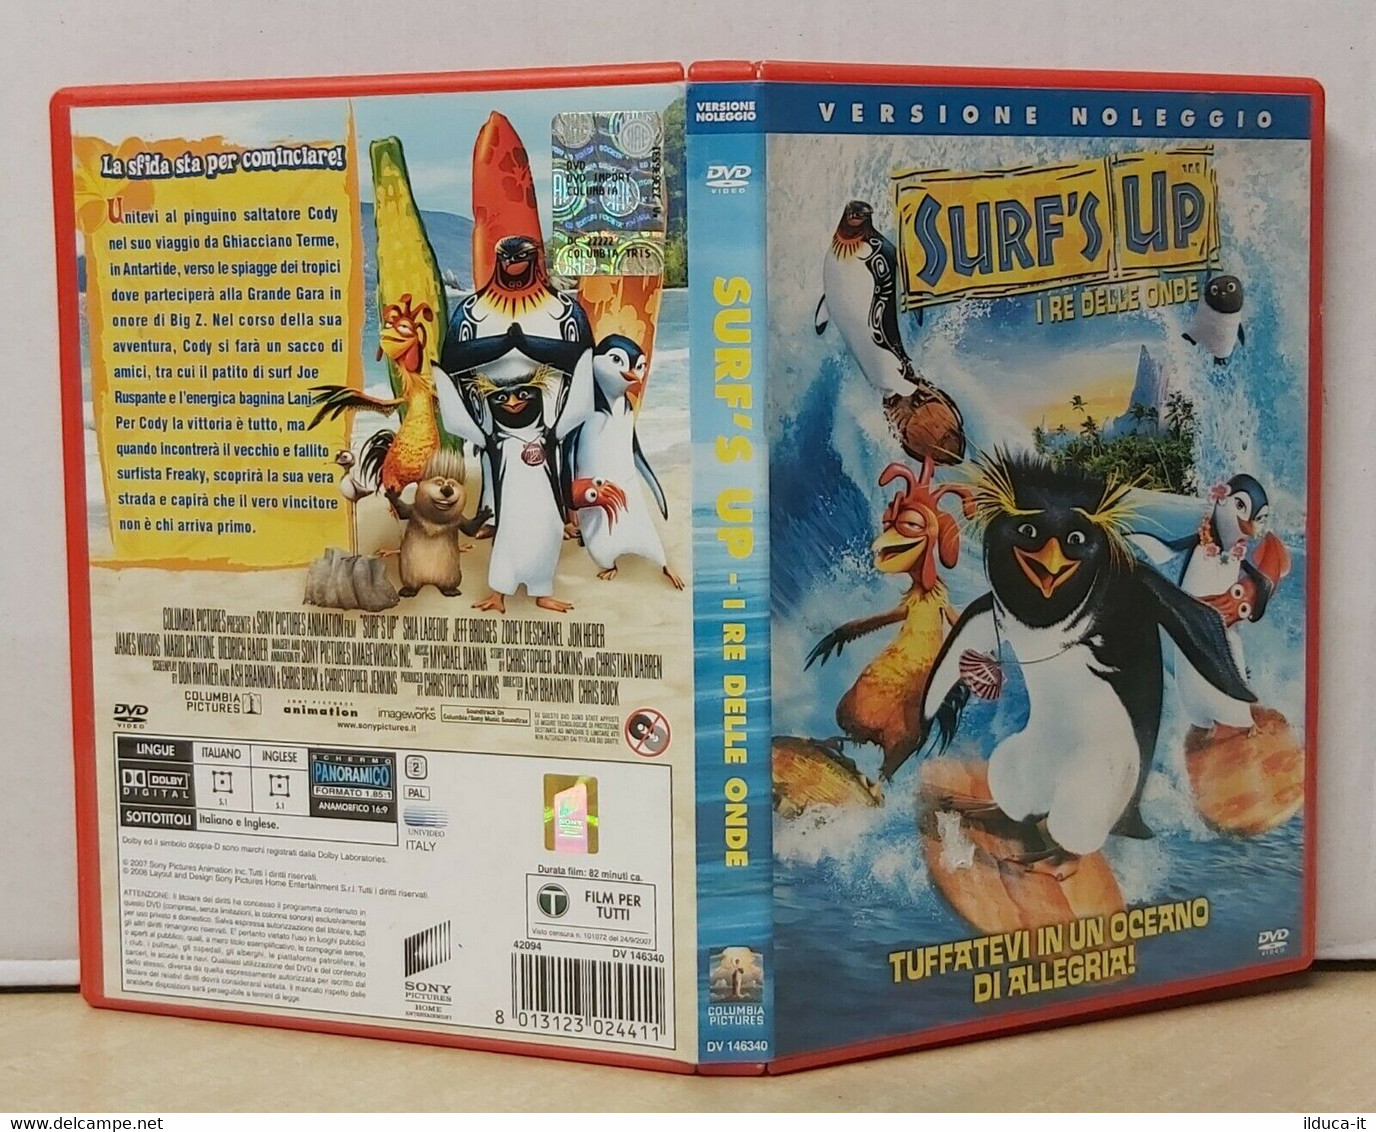 00087 DVD - SURF'S UP I Re Delle Onde - Columbia Picture 2008 - Animation